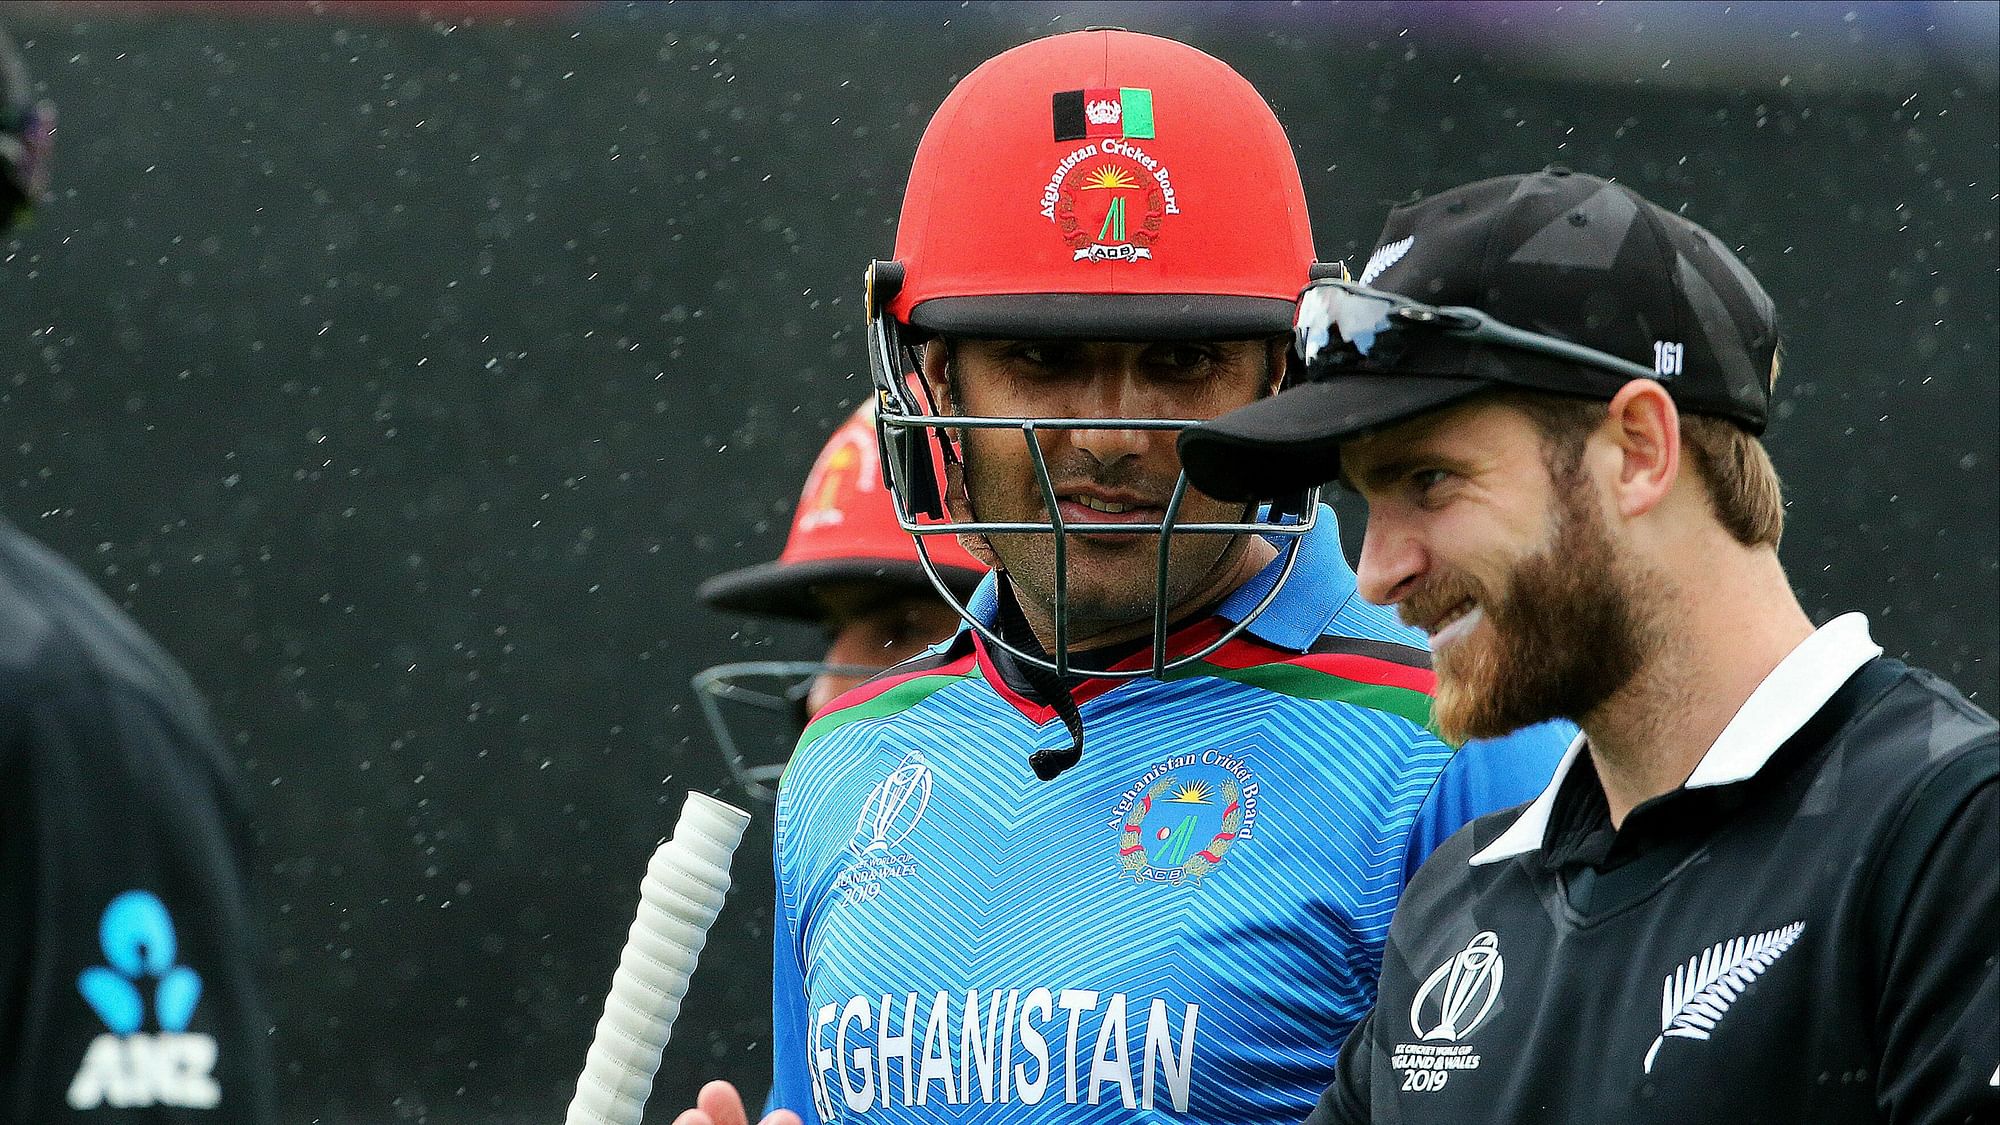 An all-round by New Zealand resulted in Afghanistan suffering their third straight loss in the ICC World Cup.